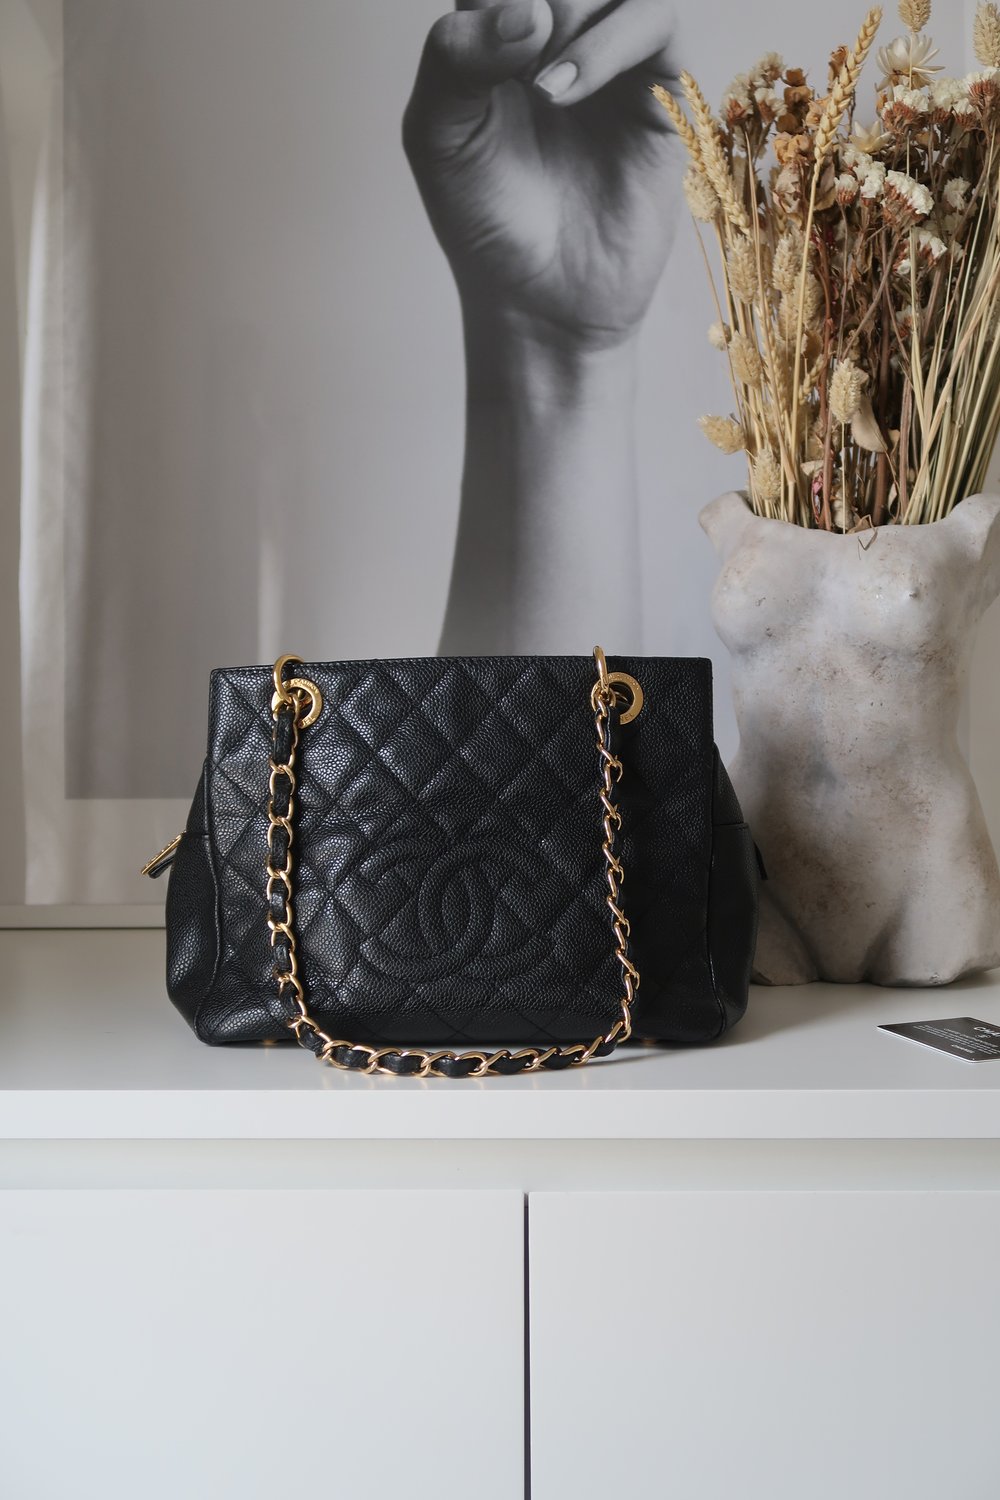 Chanel Shopping PST Petite Tote Caviar Black Leather — Blaise Ruby Loves